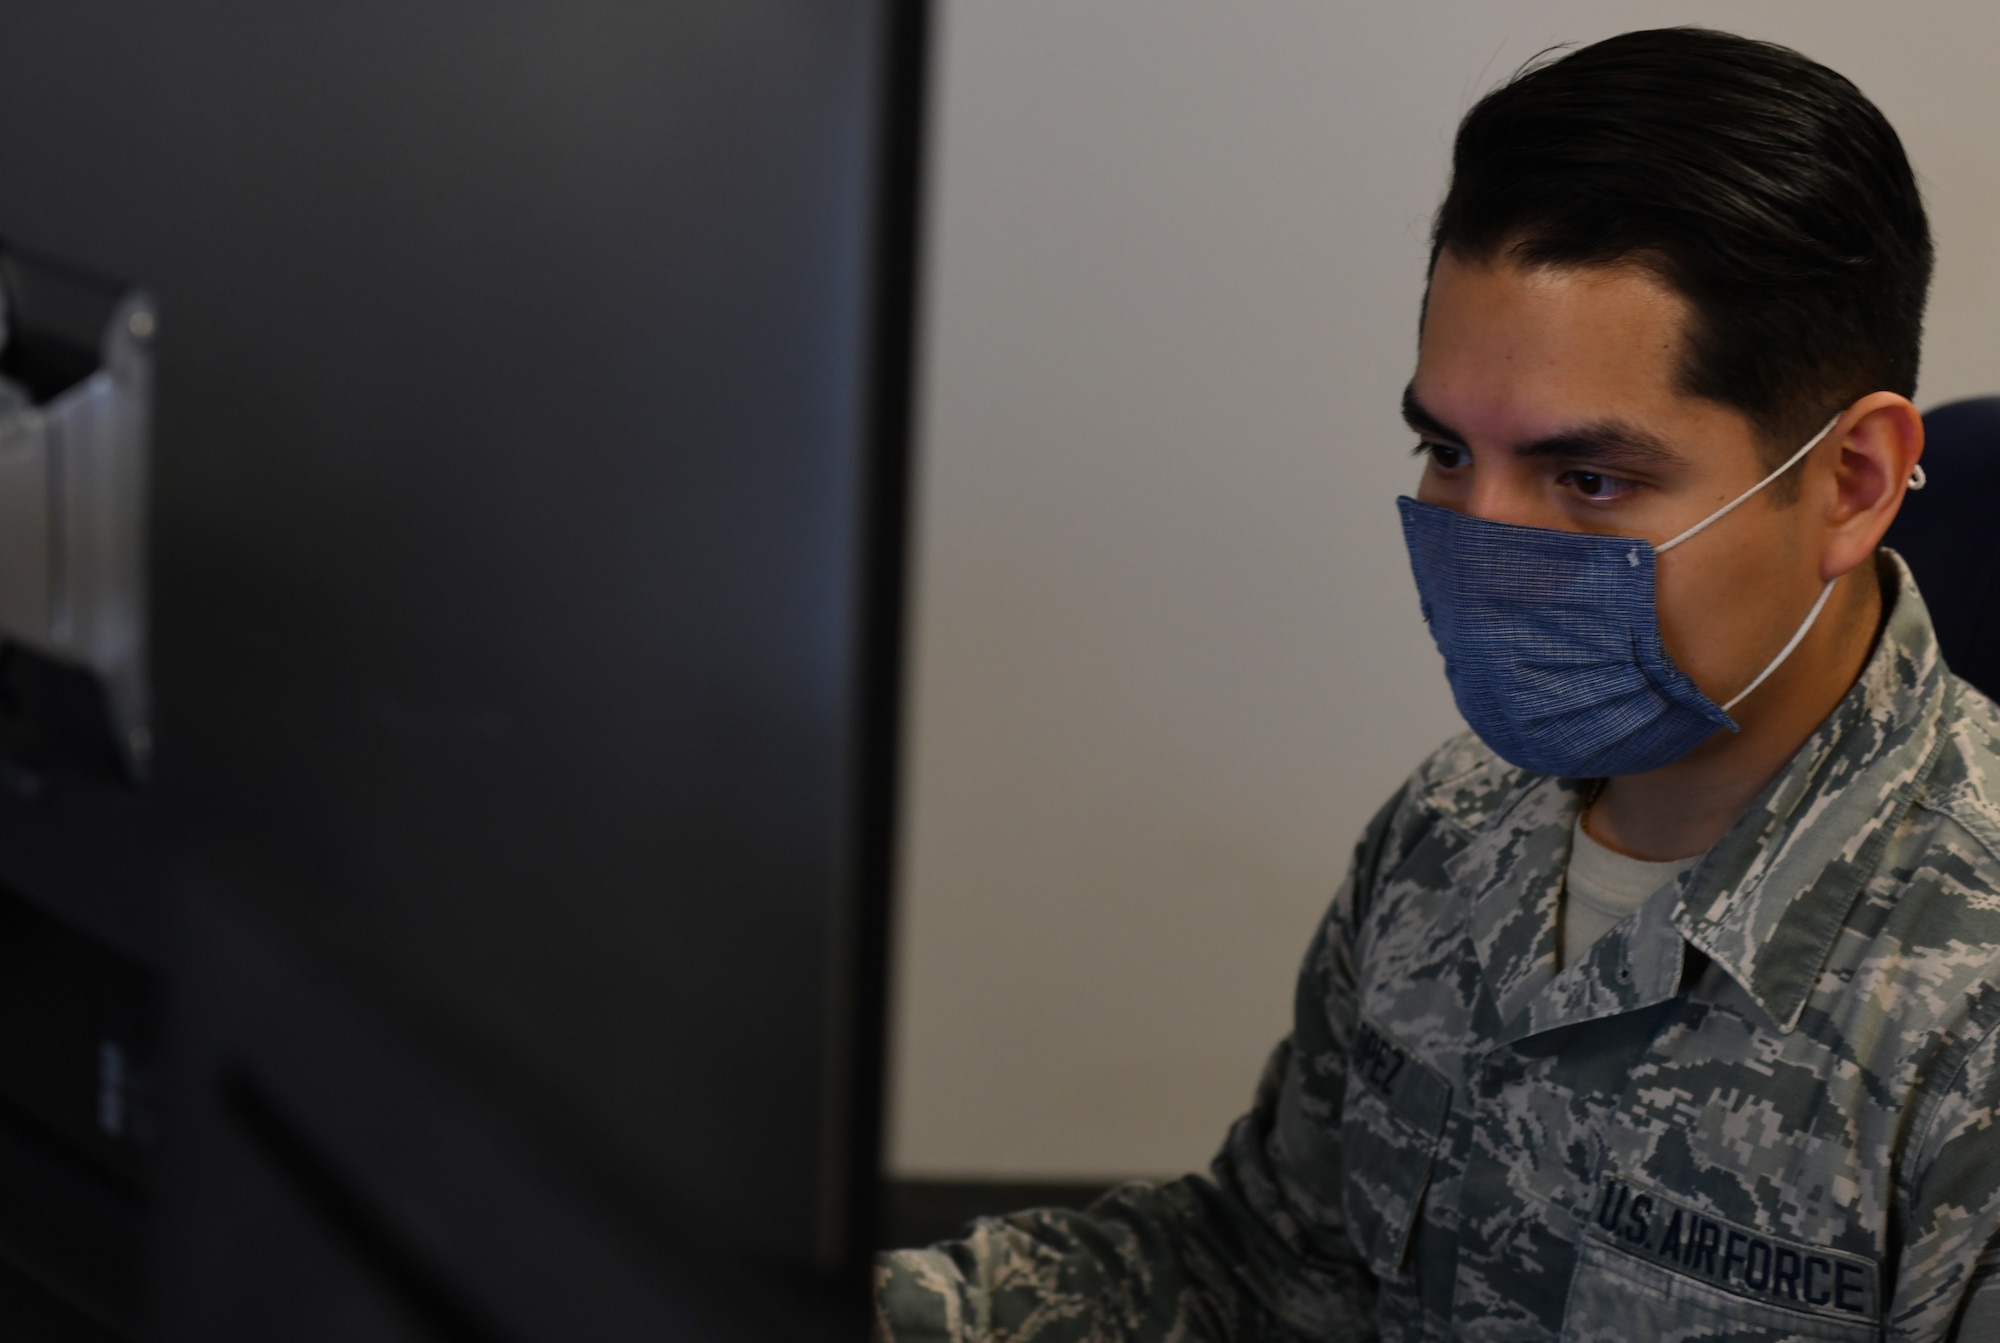 A 62d Cyberspace Squadron Airman monitors his workstation for activity at Buckley Air Force Base, Colo. (U.S. Space Force photo by Staff Sgt. Timothy R. Kirchner)